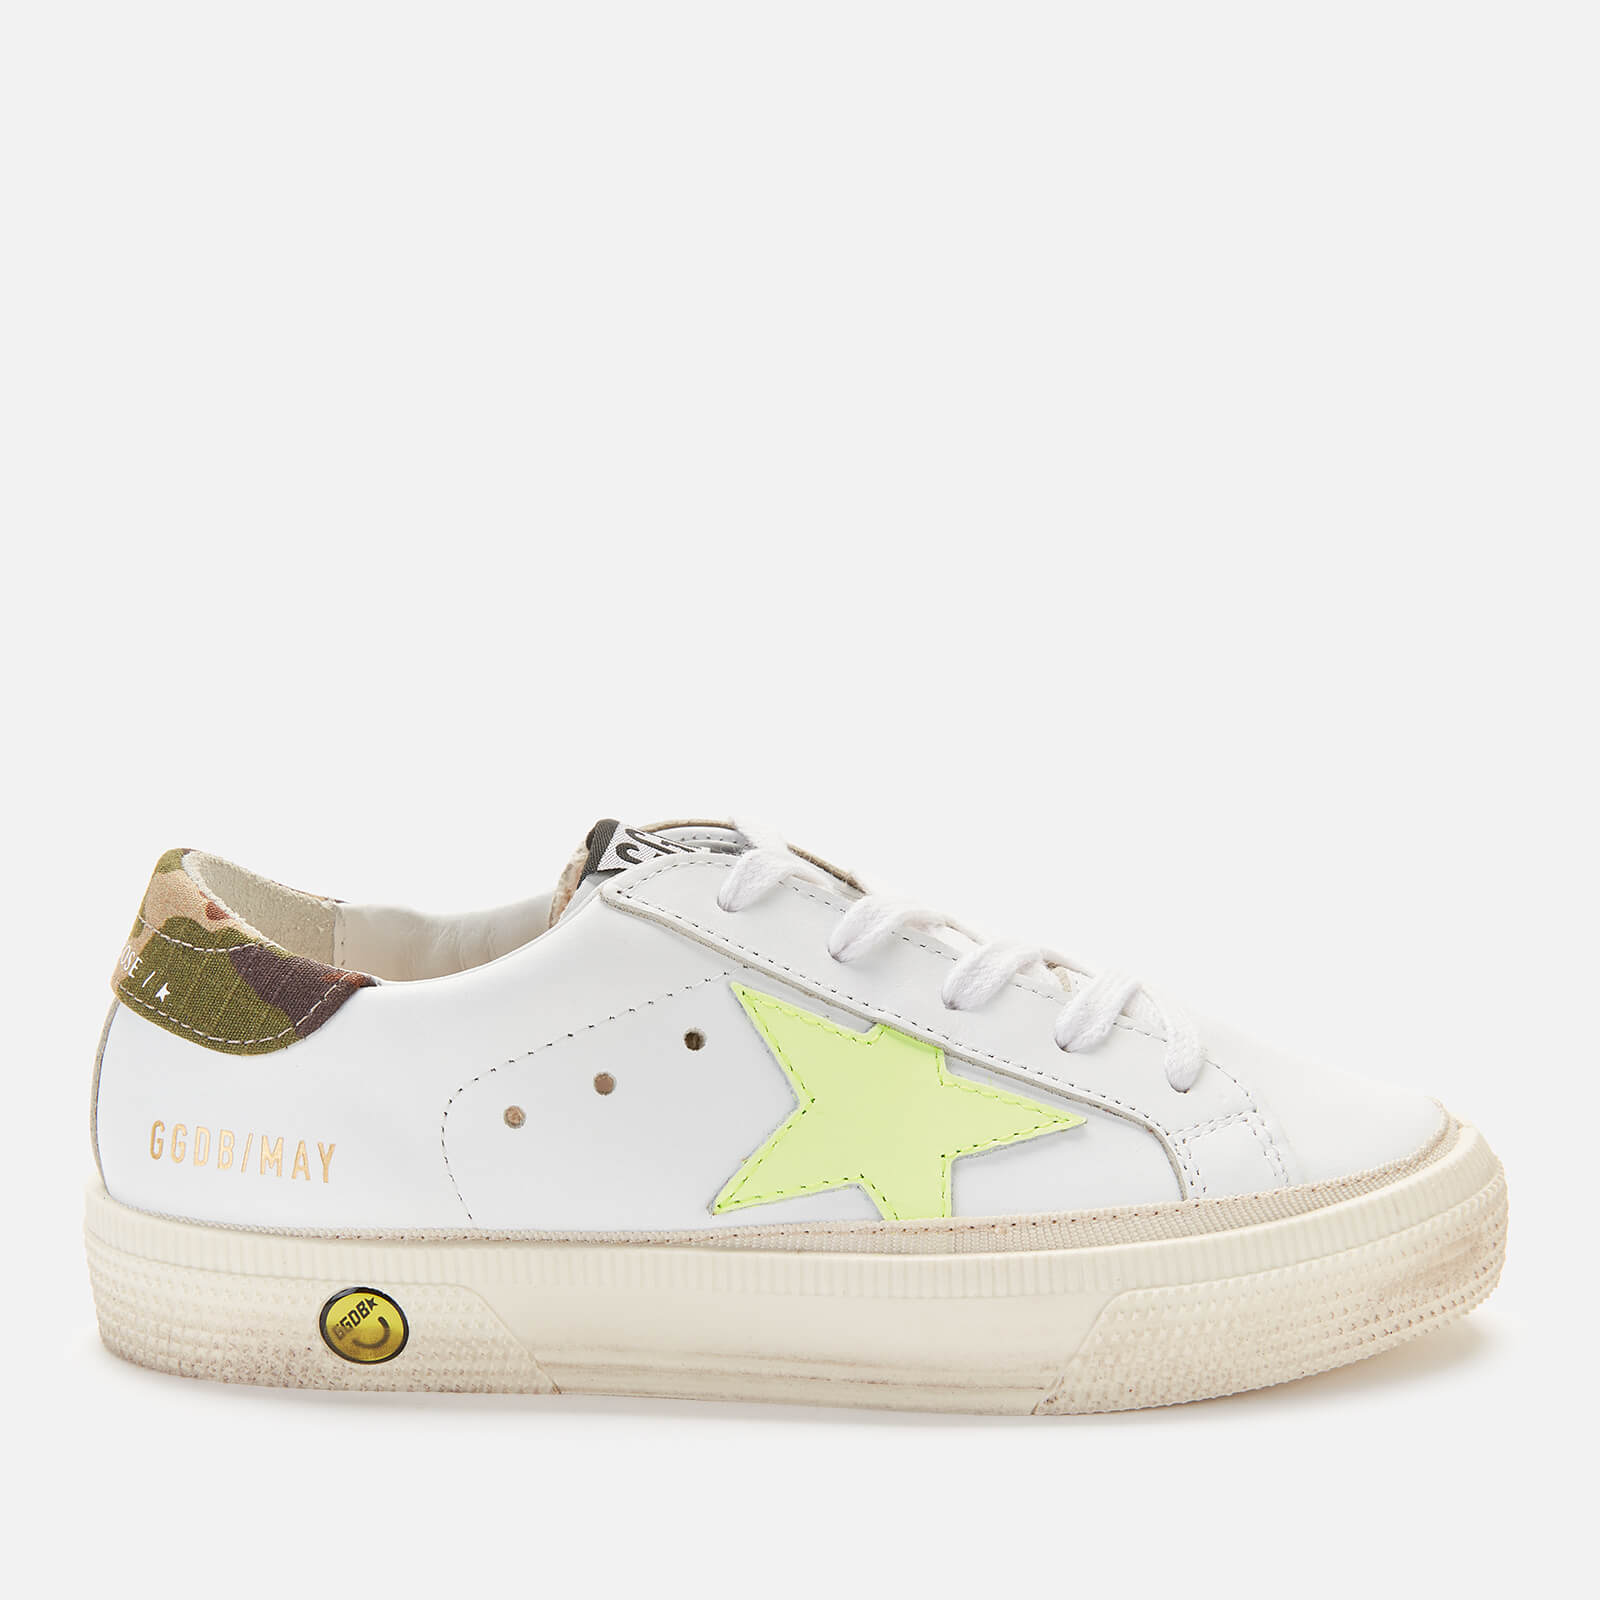 Golden Goose Kids' Leather Upper Star And Heel Trainers - White/Fluo Yellow/Green Camouflage - UK 12 Kids